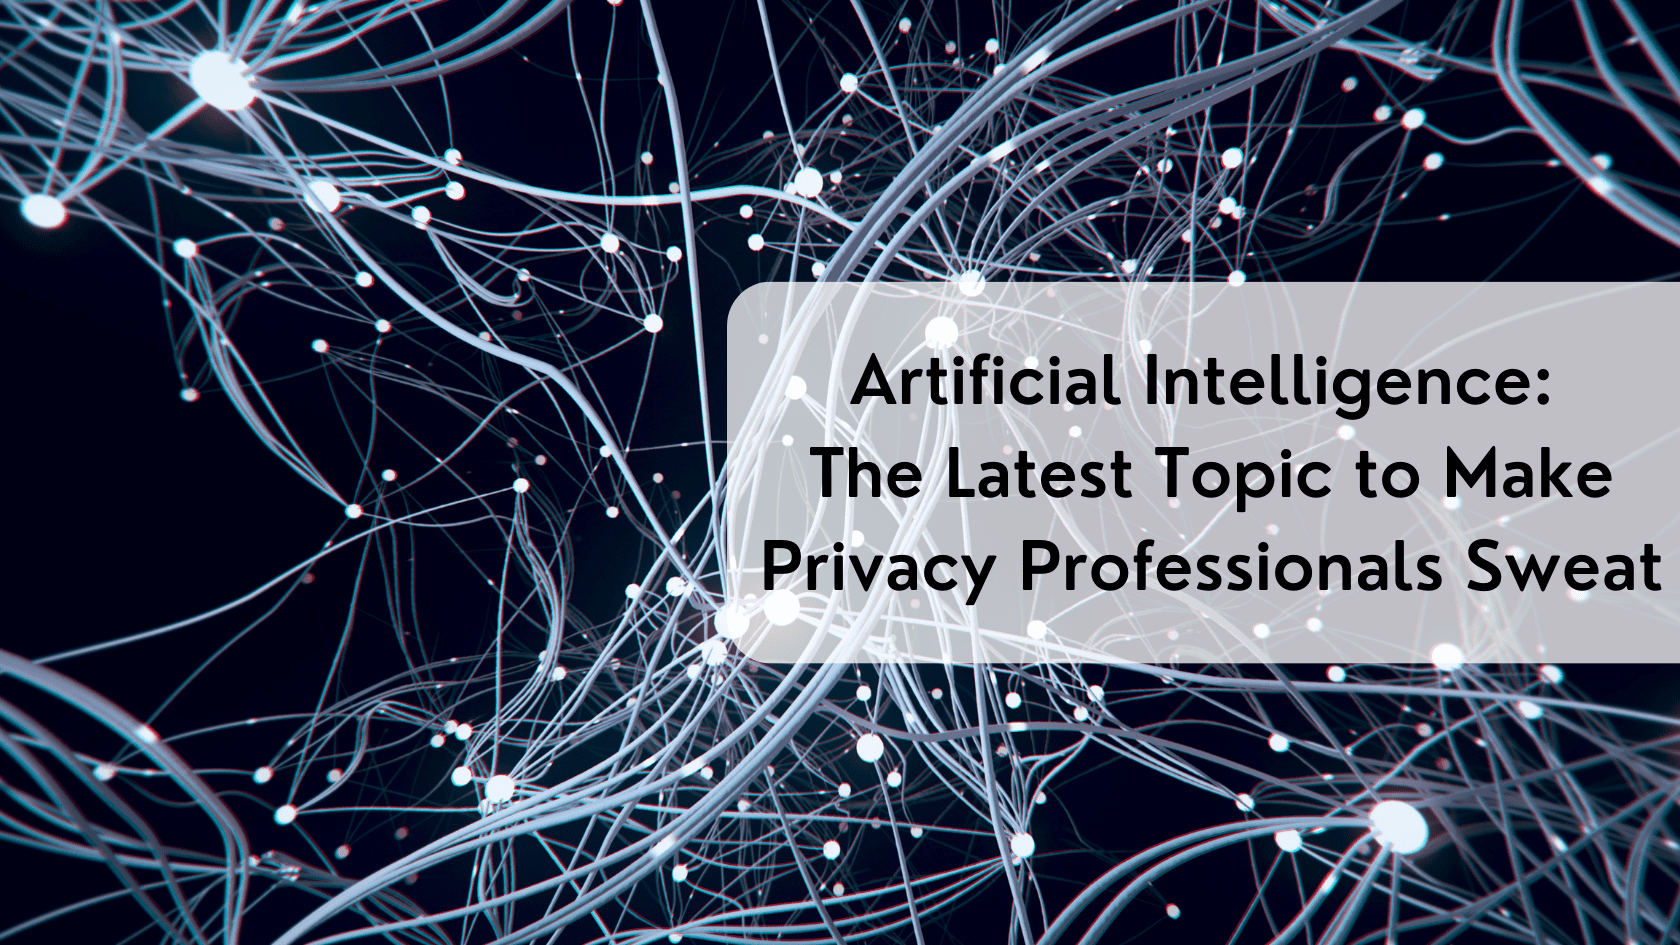 Artificial Intelligence: The Latest Topic to Make Privacy Professionals Sweat